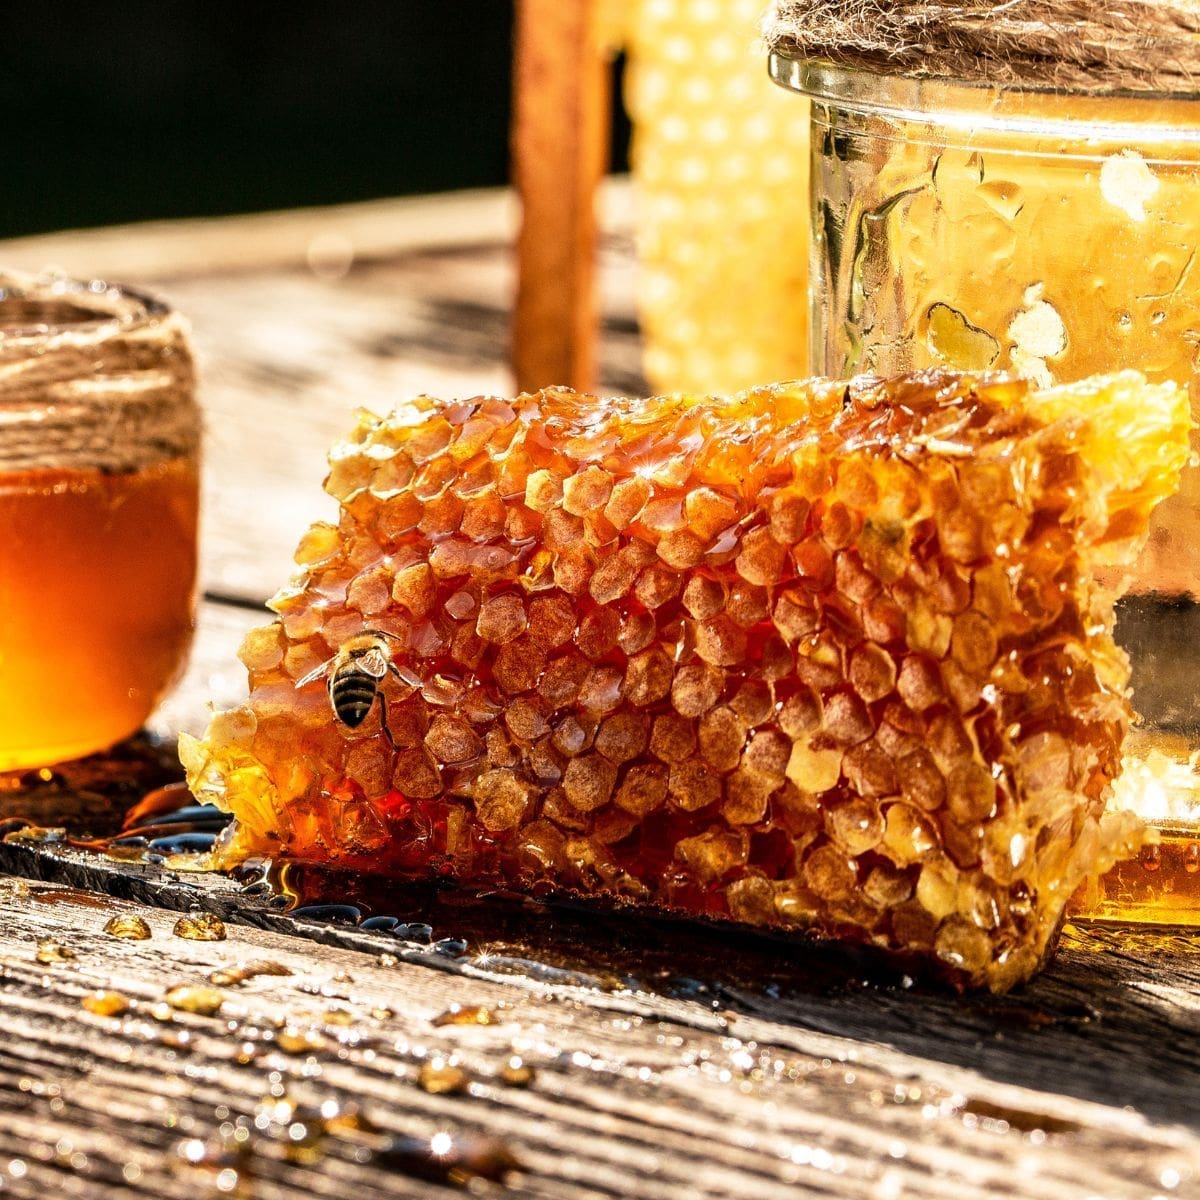 What Does Honeycomb Taste Like and How Should You Store It?